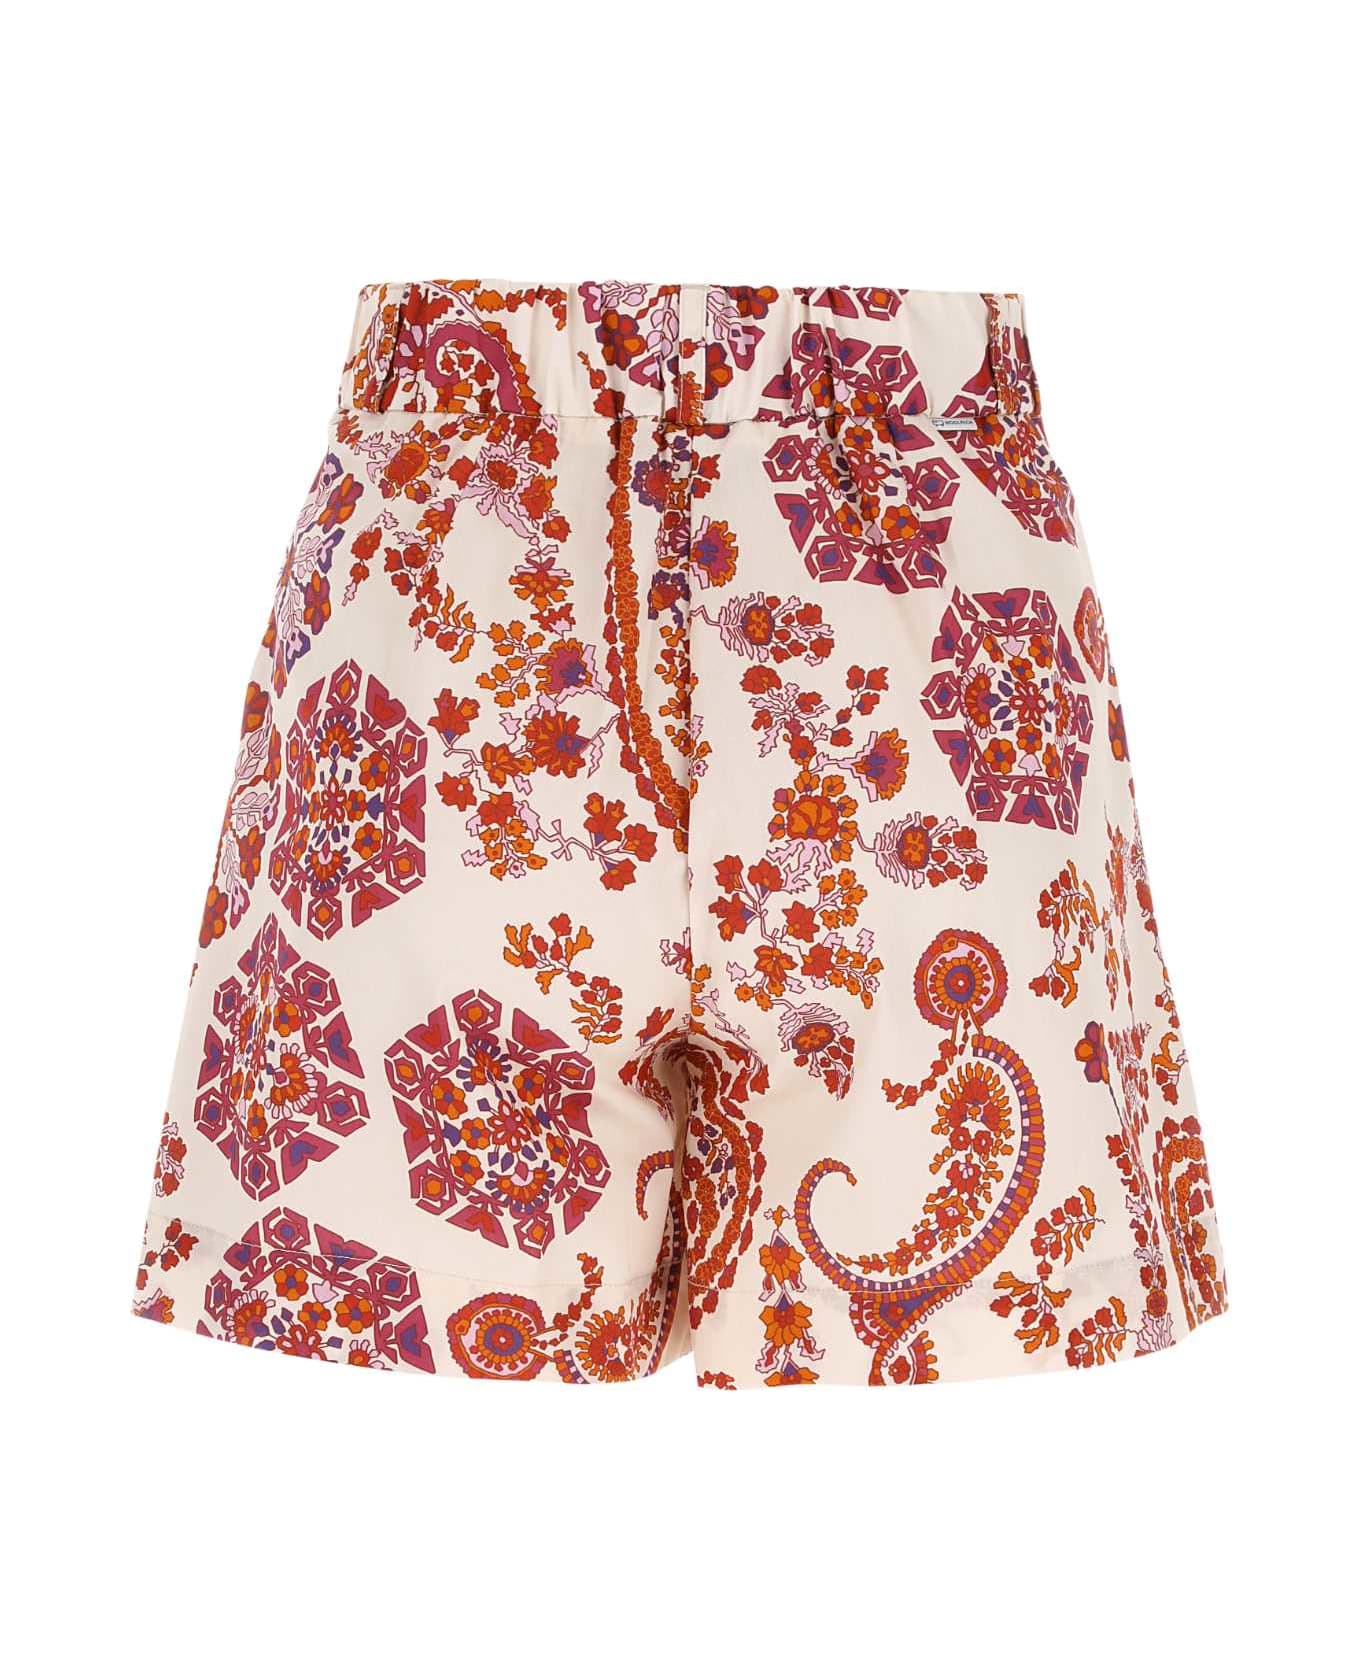 Woolrich Printed Cotton Shorts - 5490